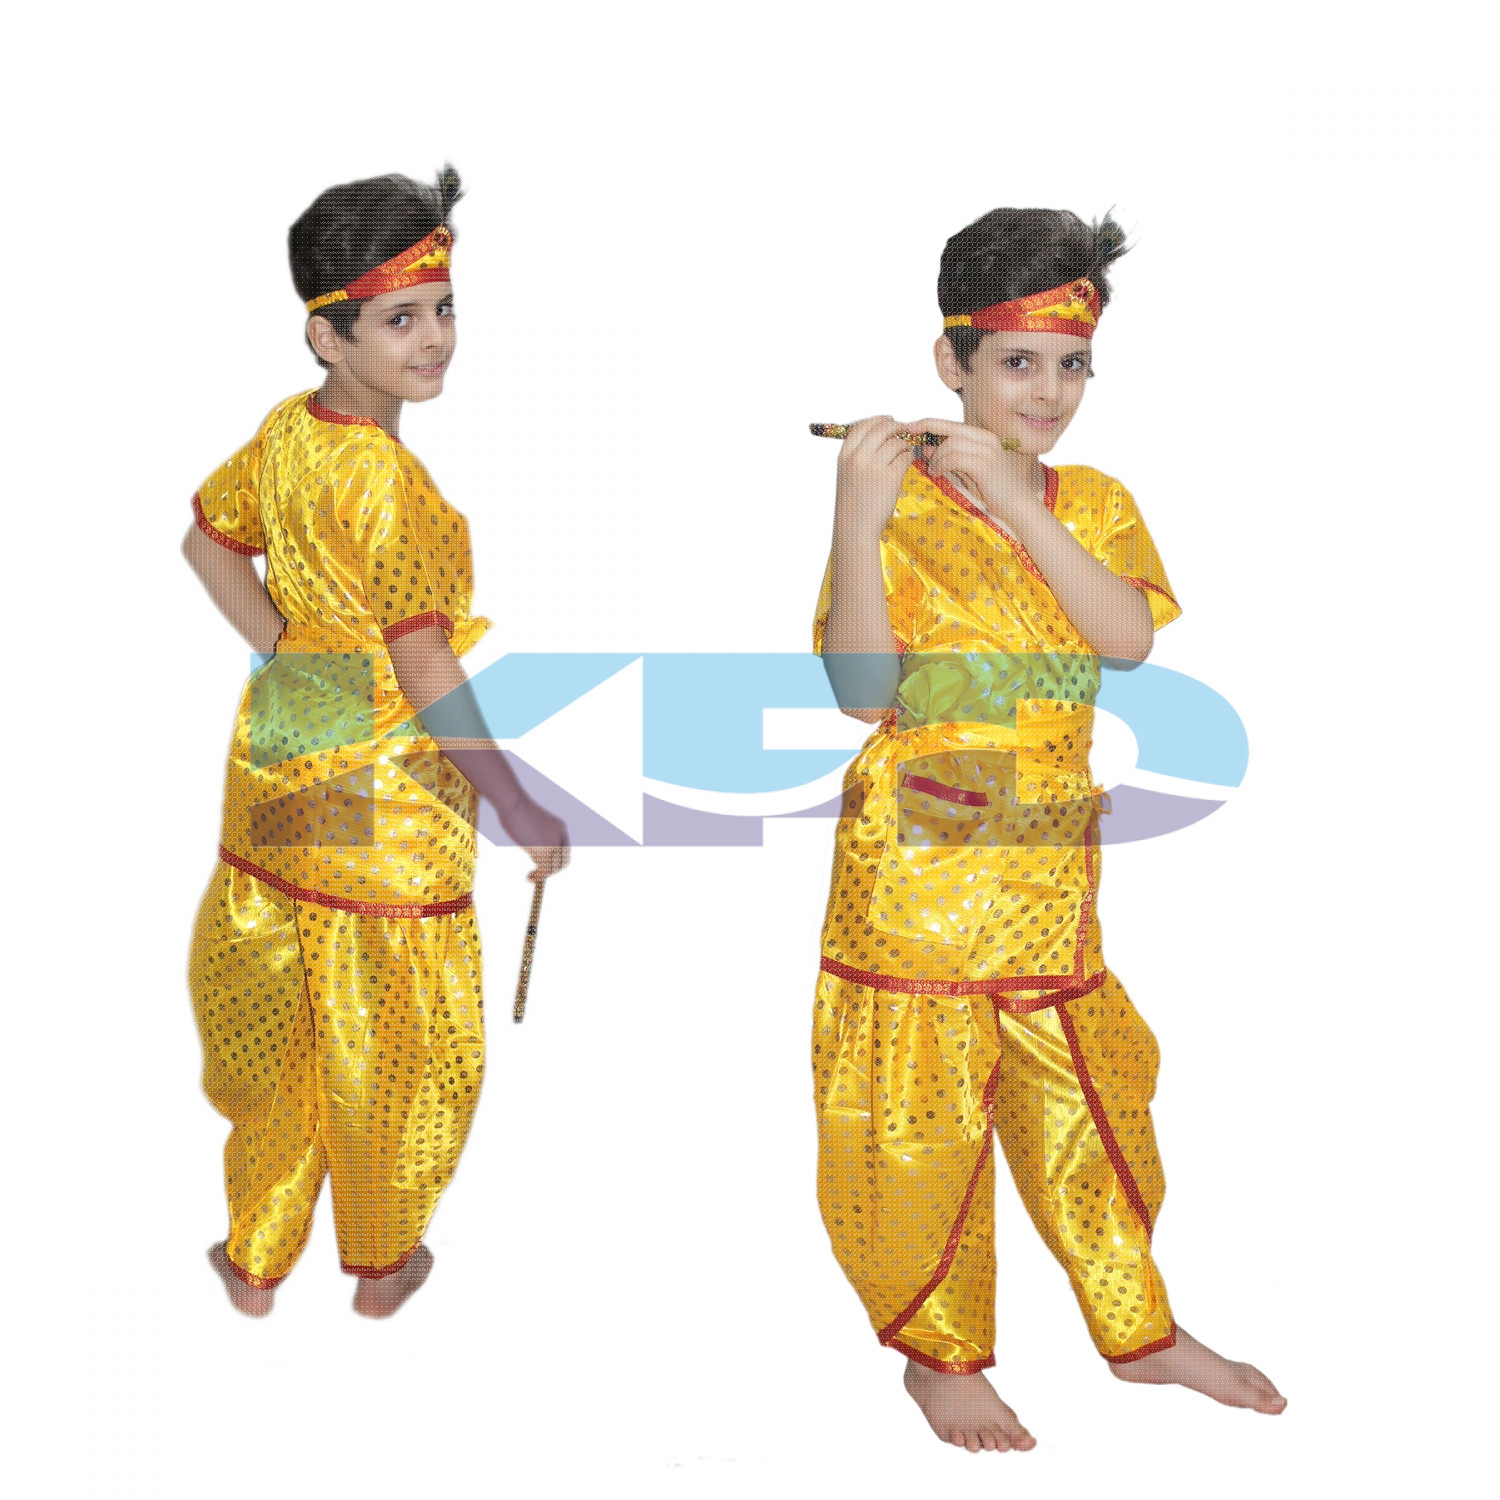 Krishna Dotted fancy dress for kids,Krishnaleela/Janmashtami/Kanha/Mythological Character for Annual functionTtheme Party/Competition/Stage Shows Dress